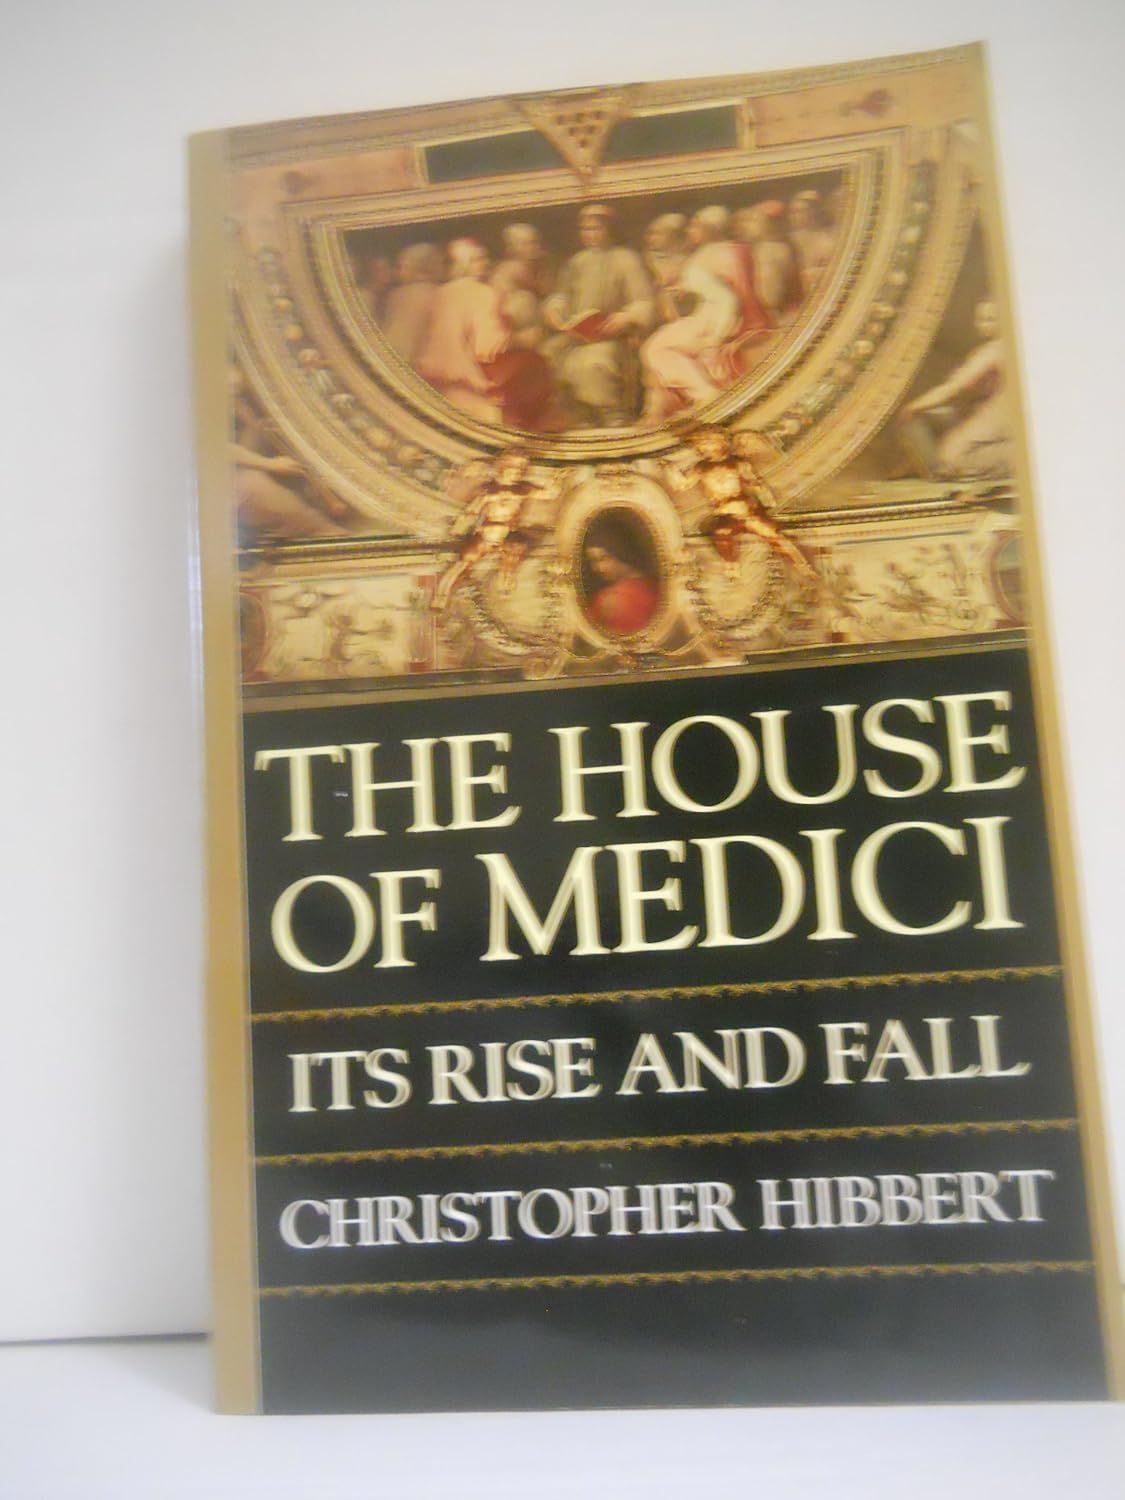 The House of Medici Its Rise and Fall by Christopher Hibbert